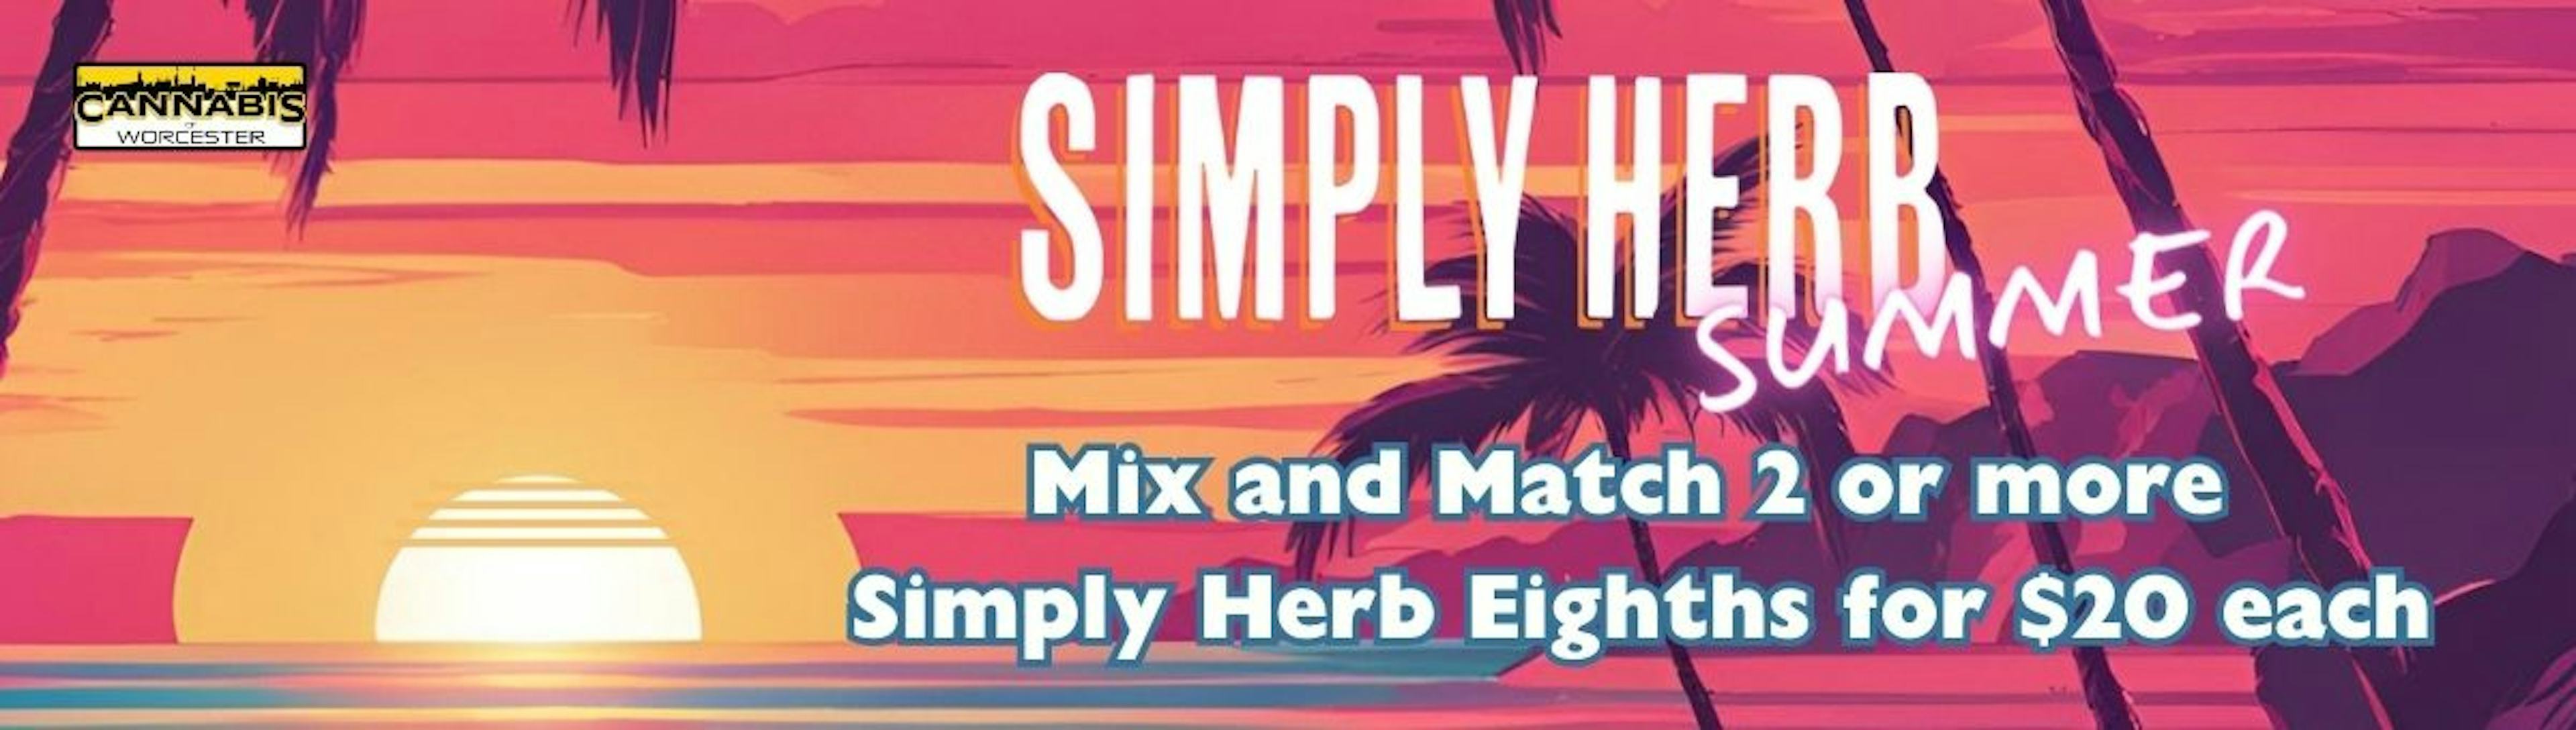 Simply Herb 2 for $20 Eighths